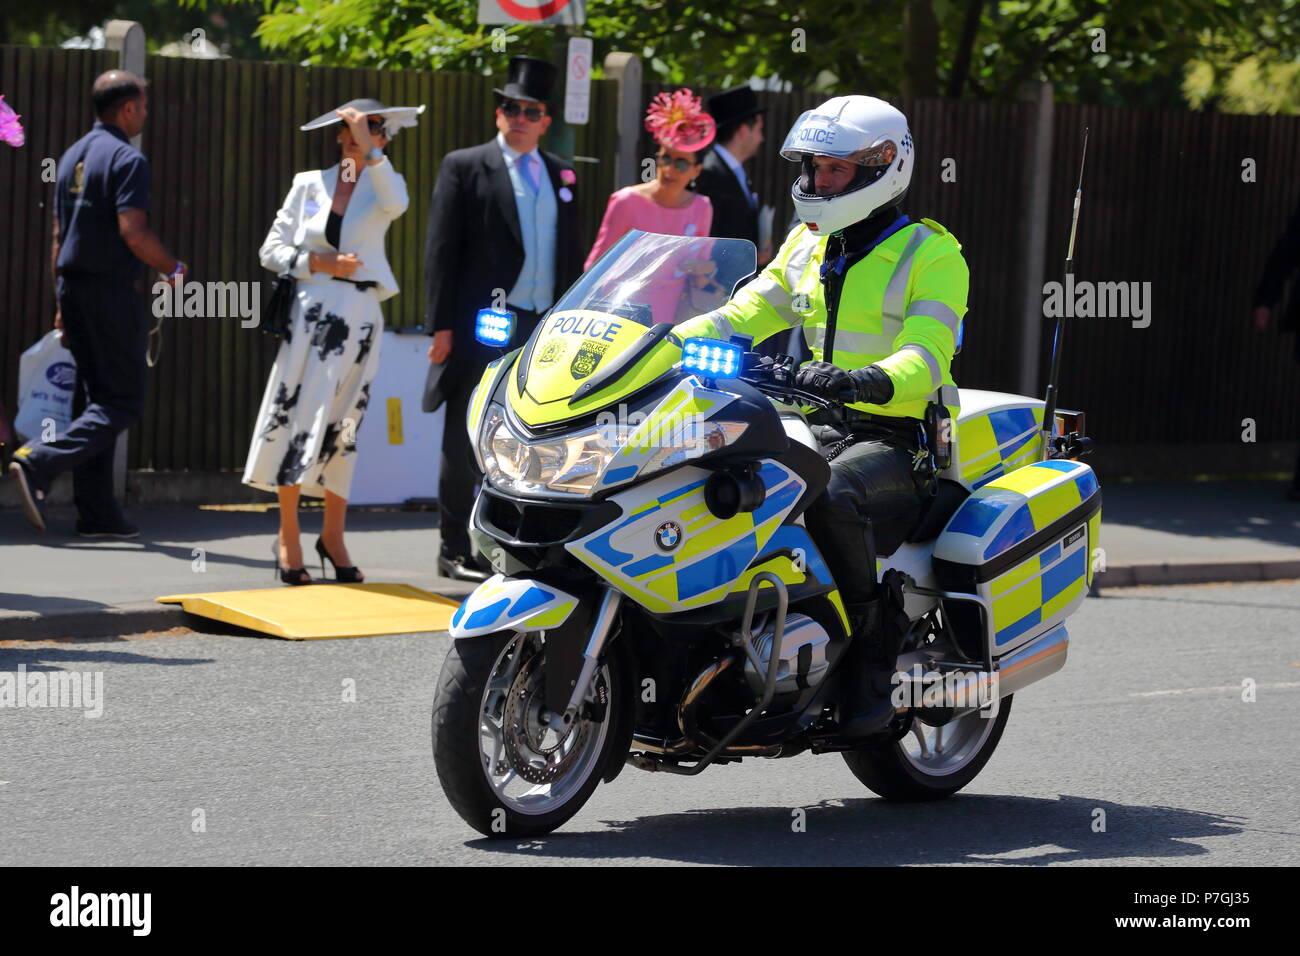 A police motorbike rider at the races at Ascot, UK Stock Photo